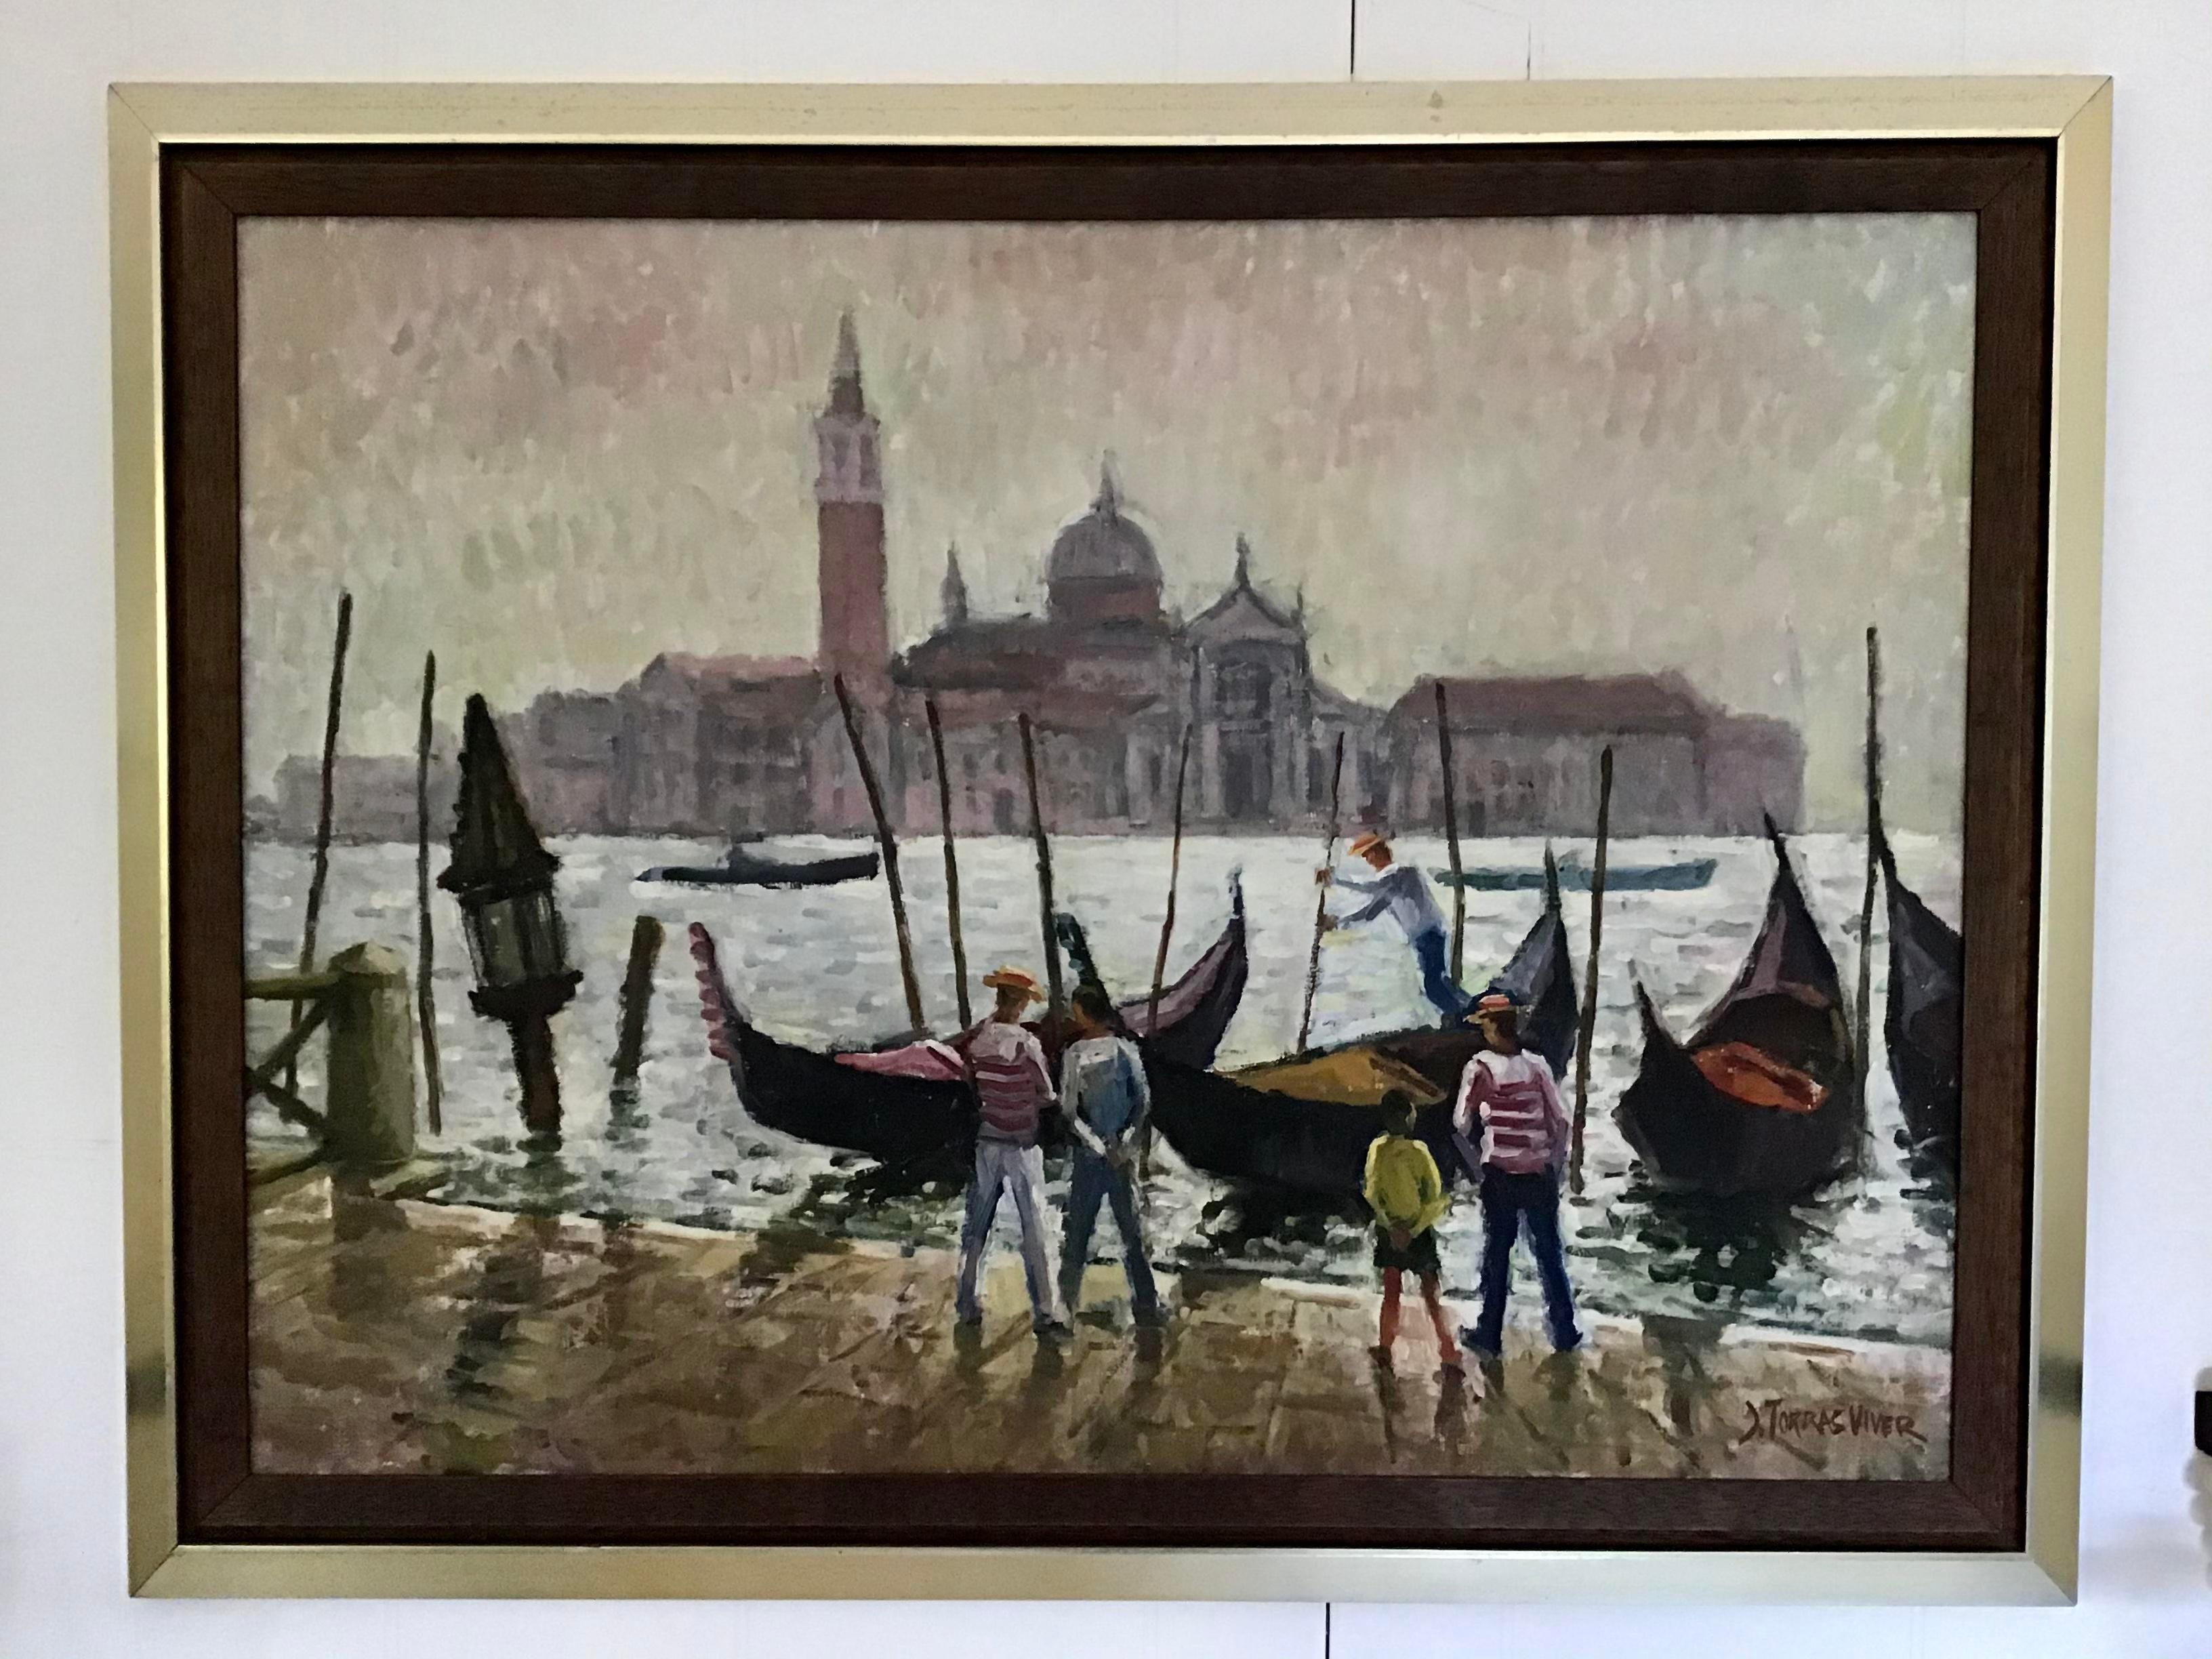 Gorgeous Venice oil painting from the 1950s. Just beautiful, add some scenic travel to your home.